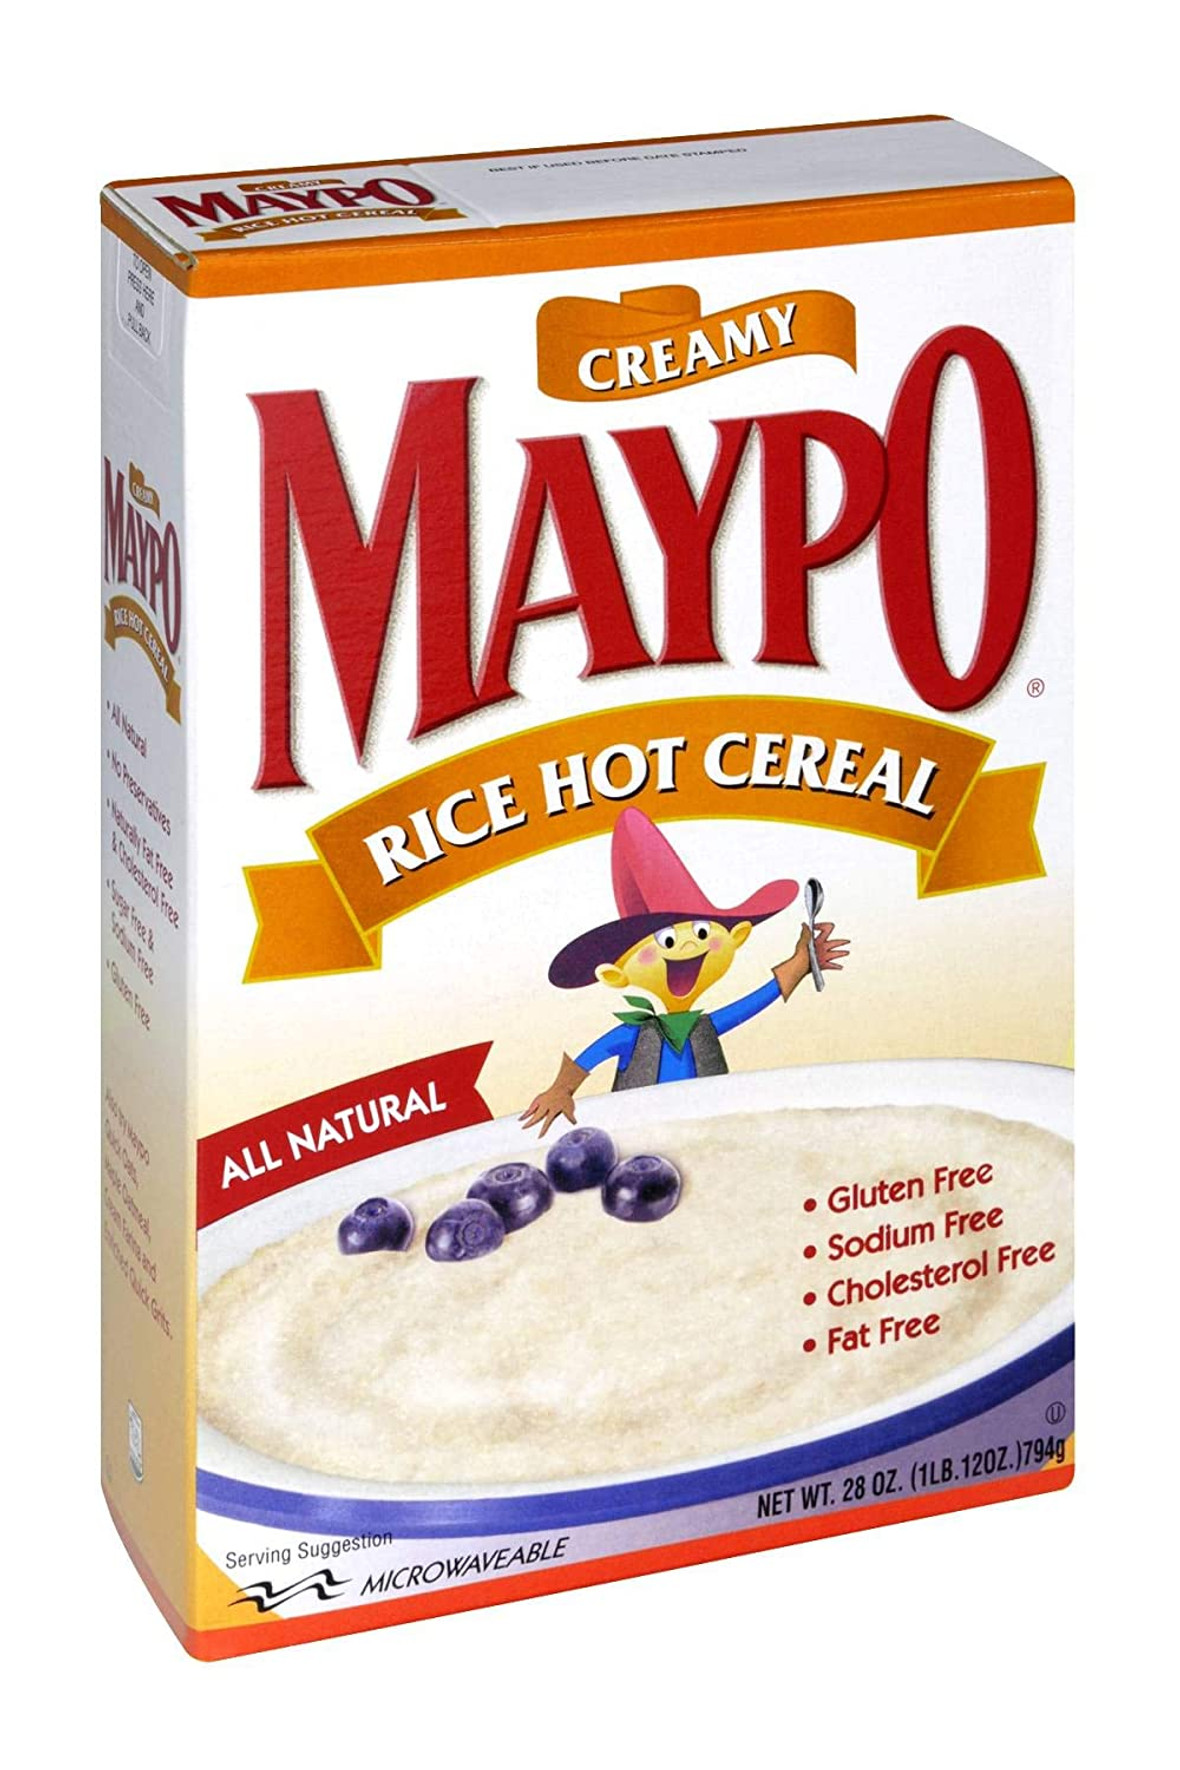 Maypo All Natural Creamy Rice Hot Cereal